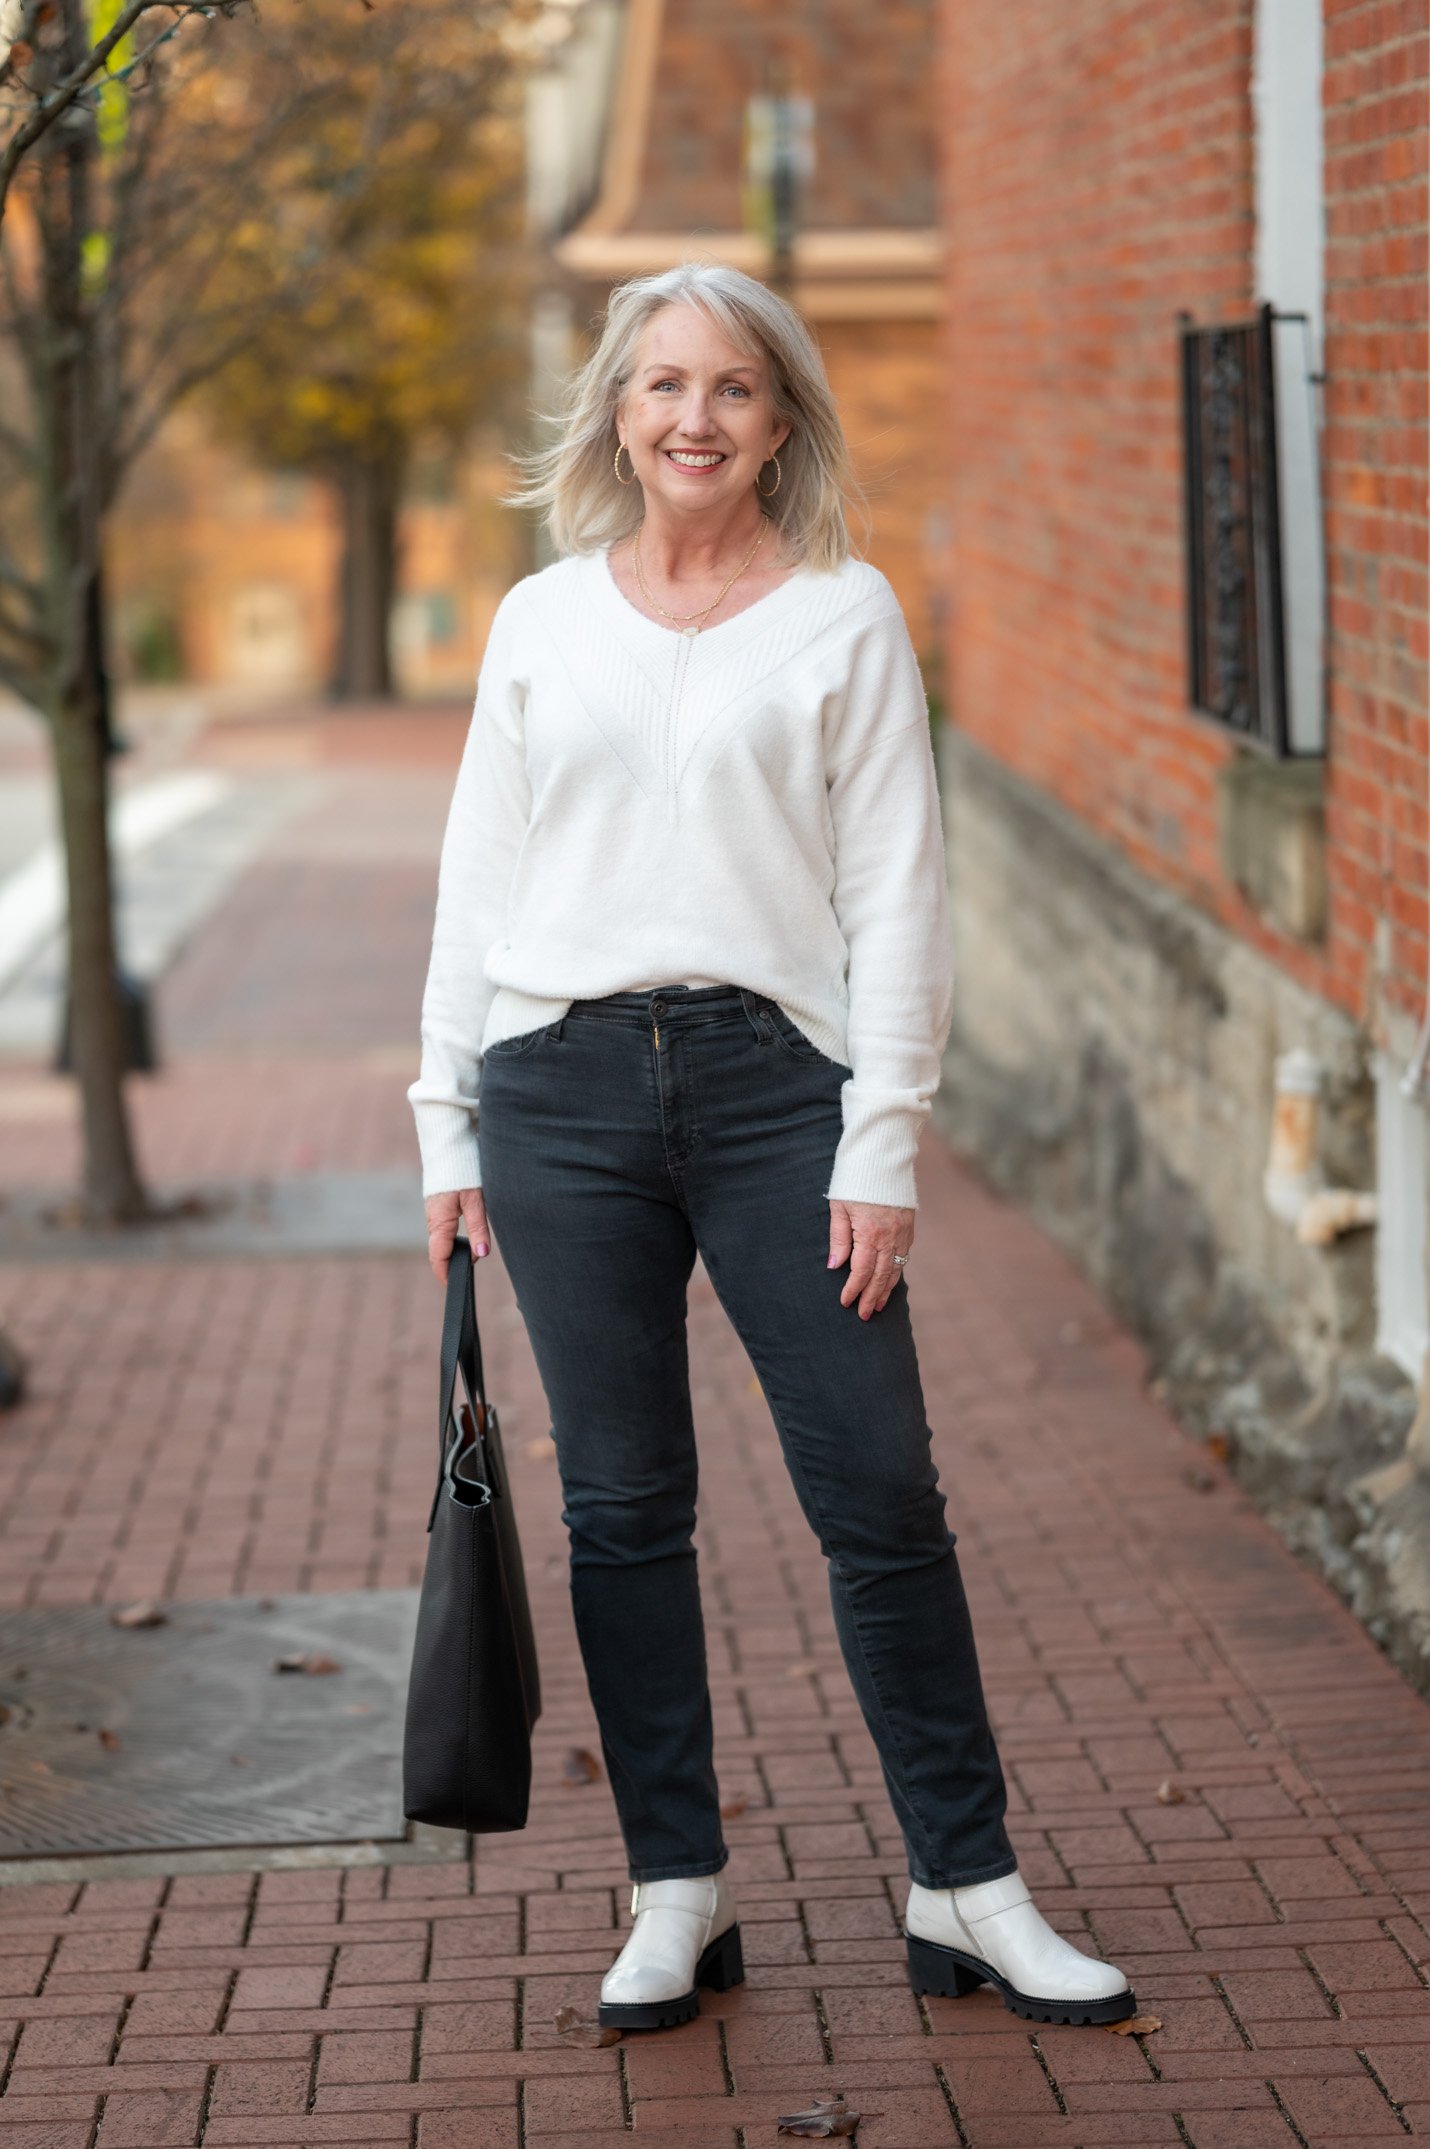 Ivory Sweater and Ivory Boots bookending black jeans